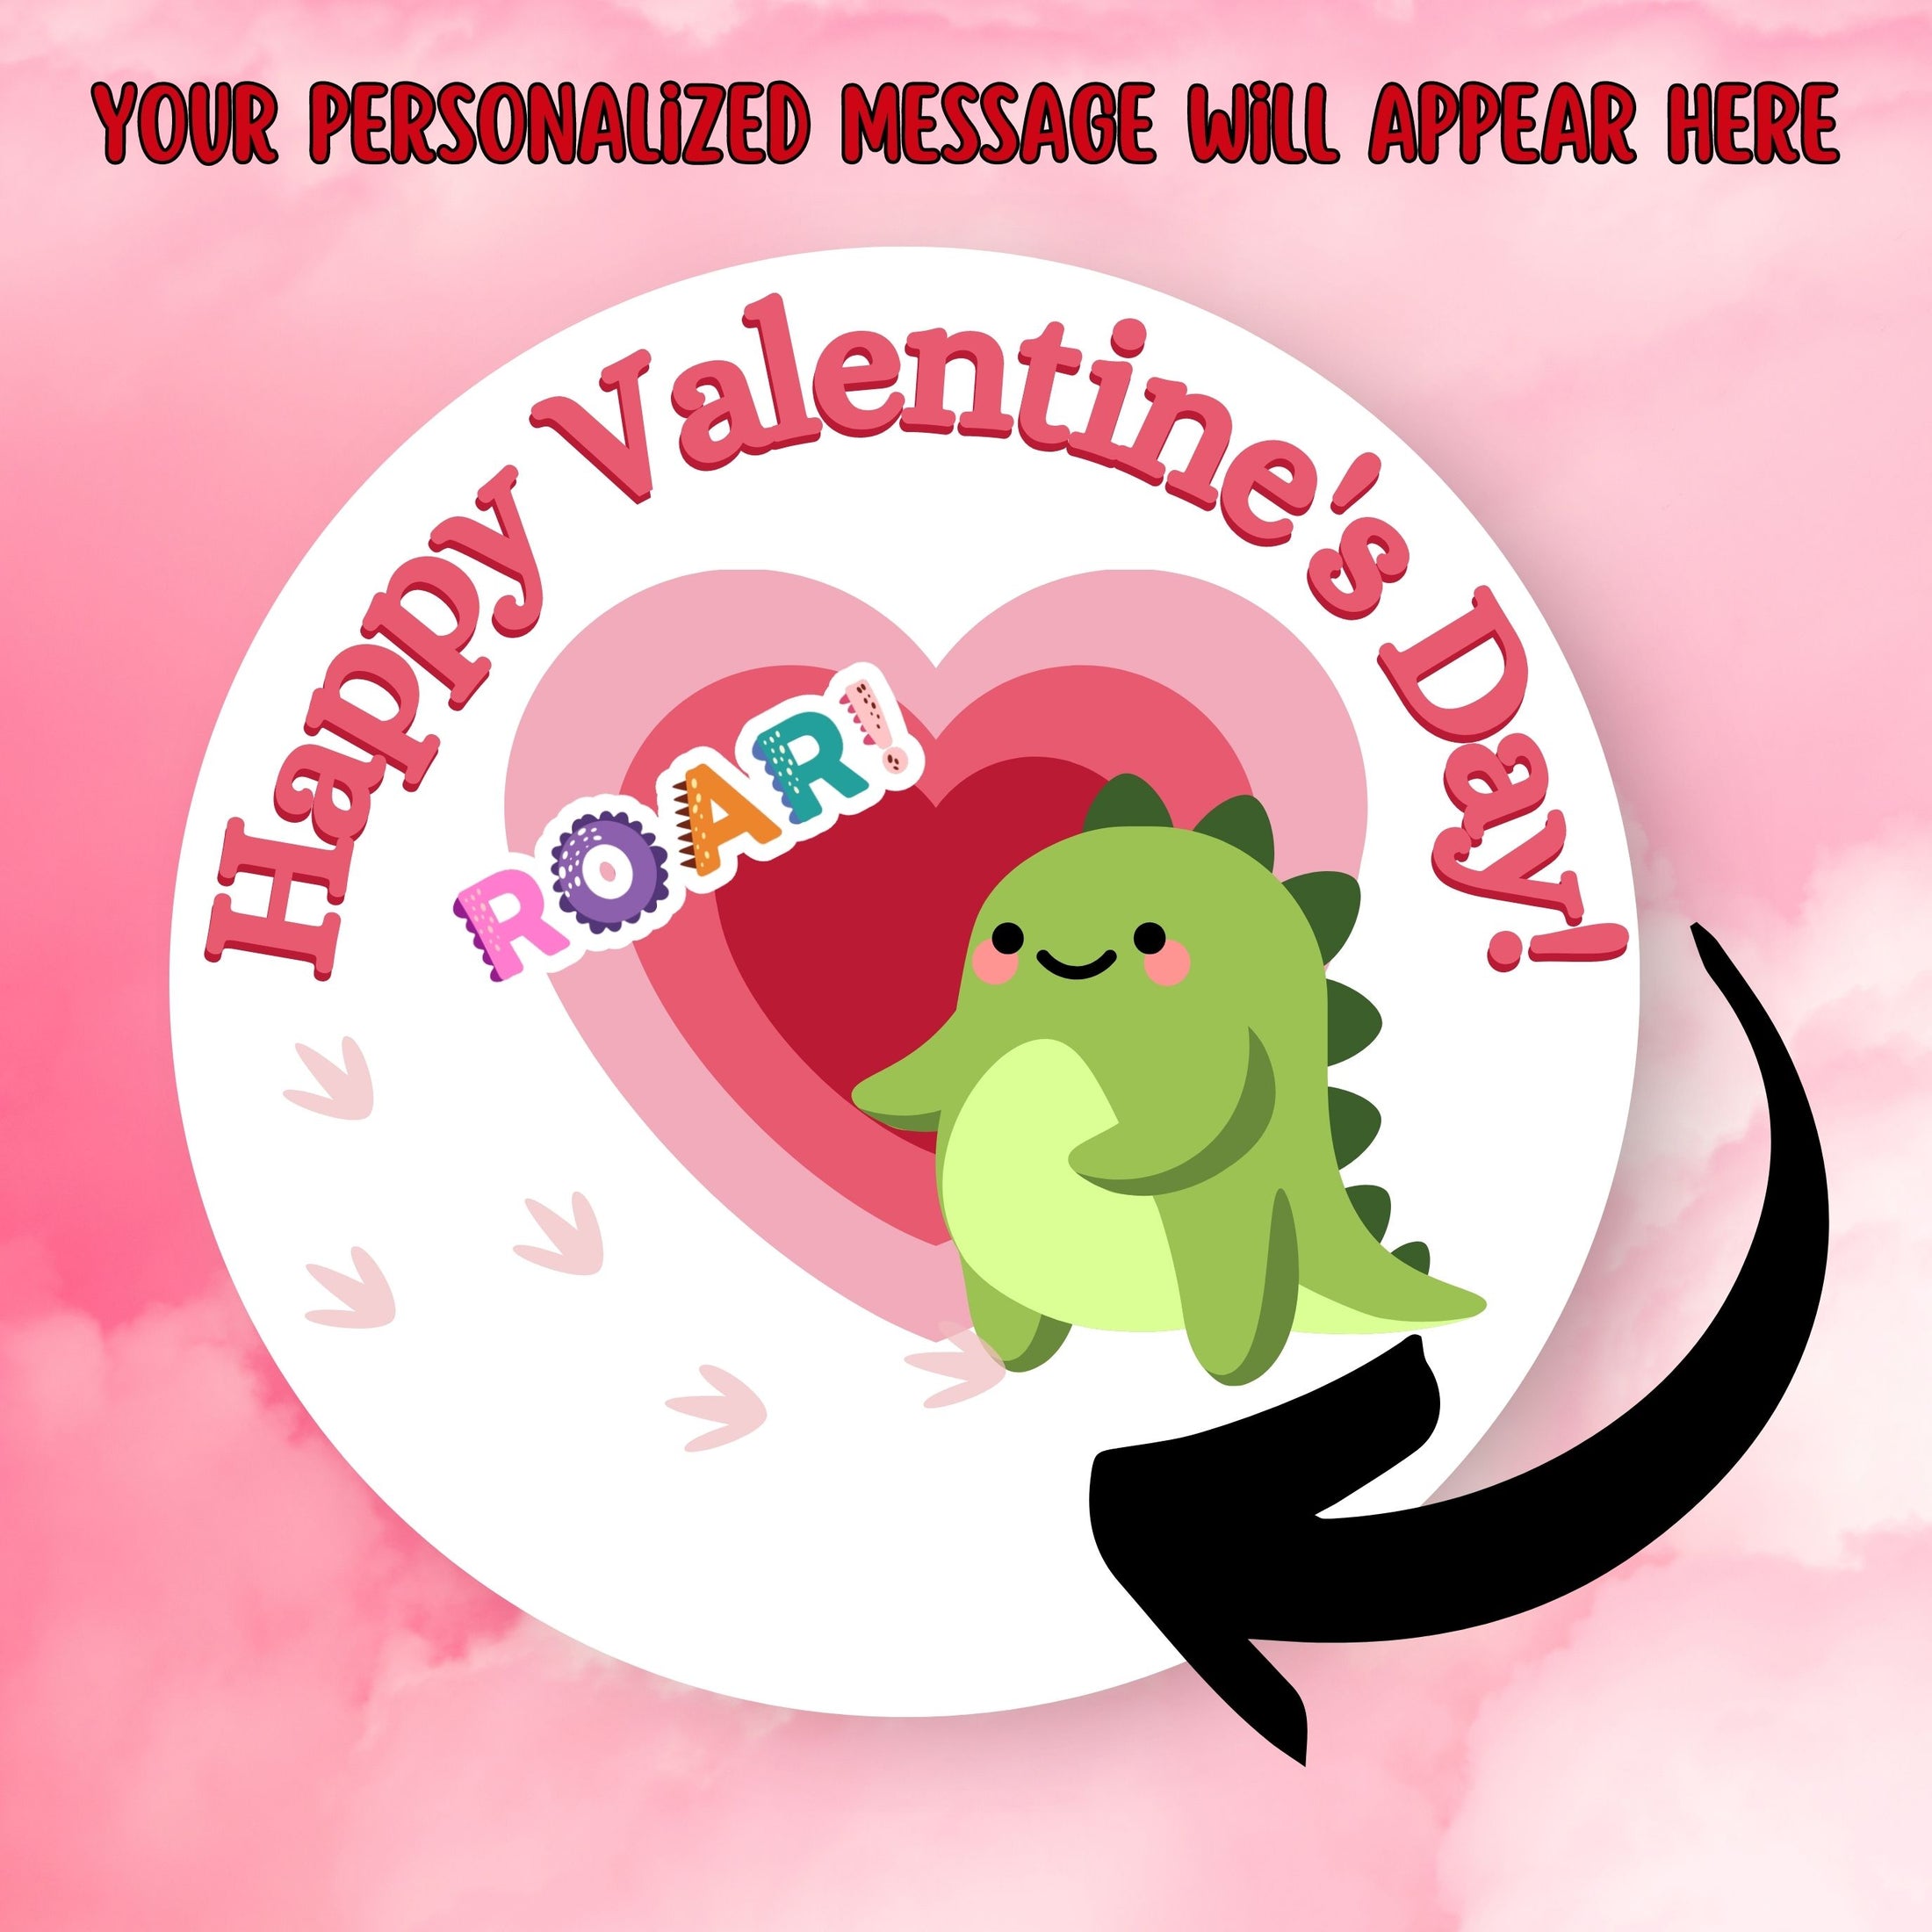 This image shows the valentine sticker with an arrow showing where your personalized message will be printed.